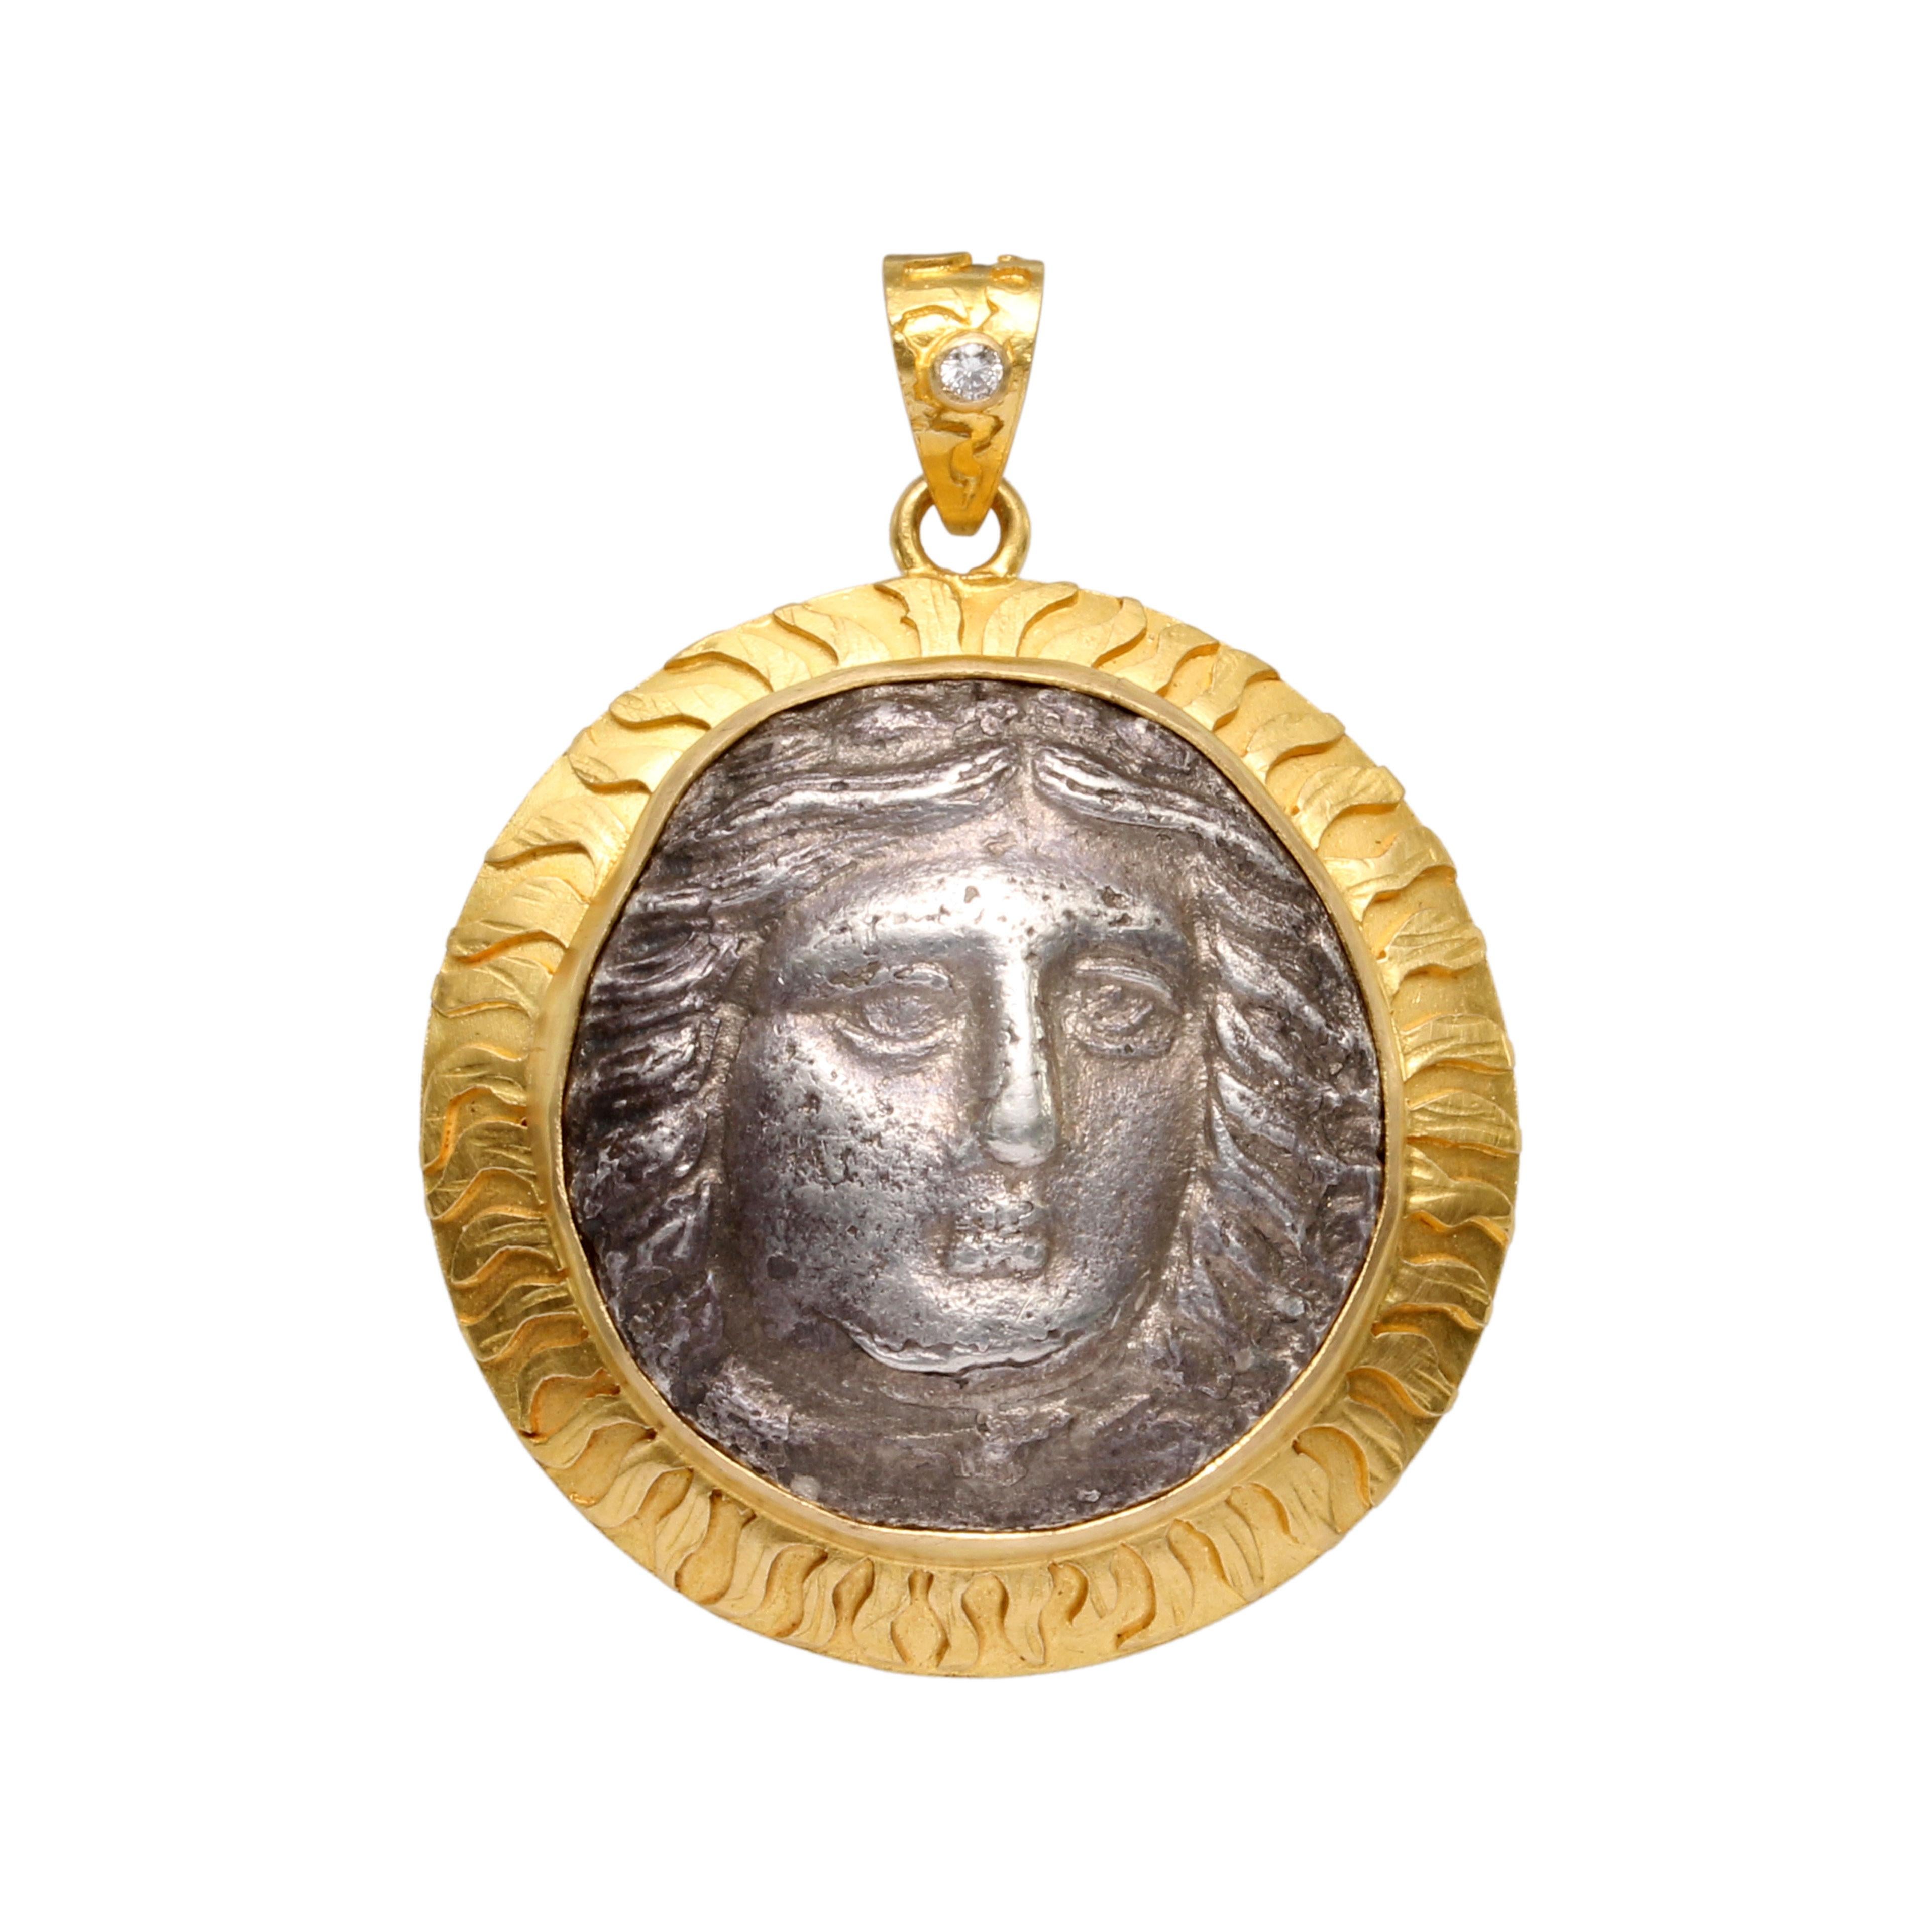 The Greek god Apollo is here depicted on an authentic silver 